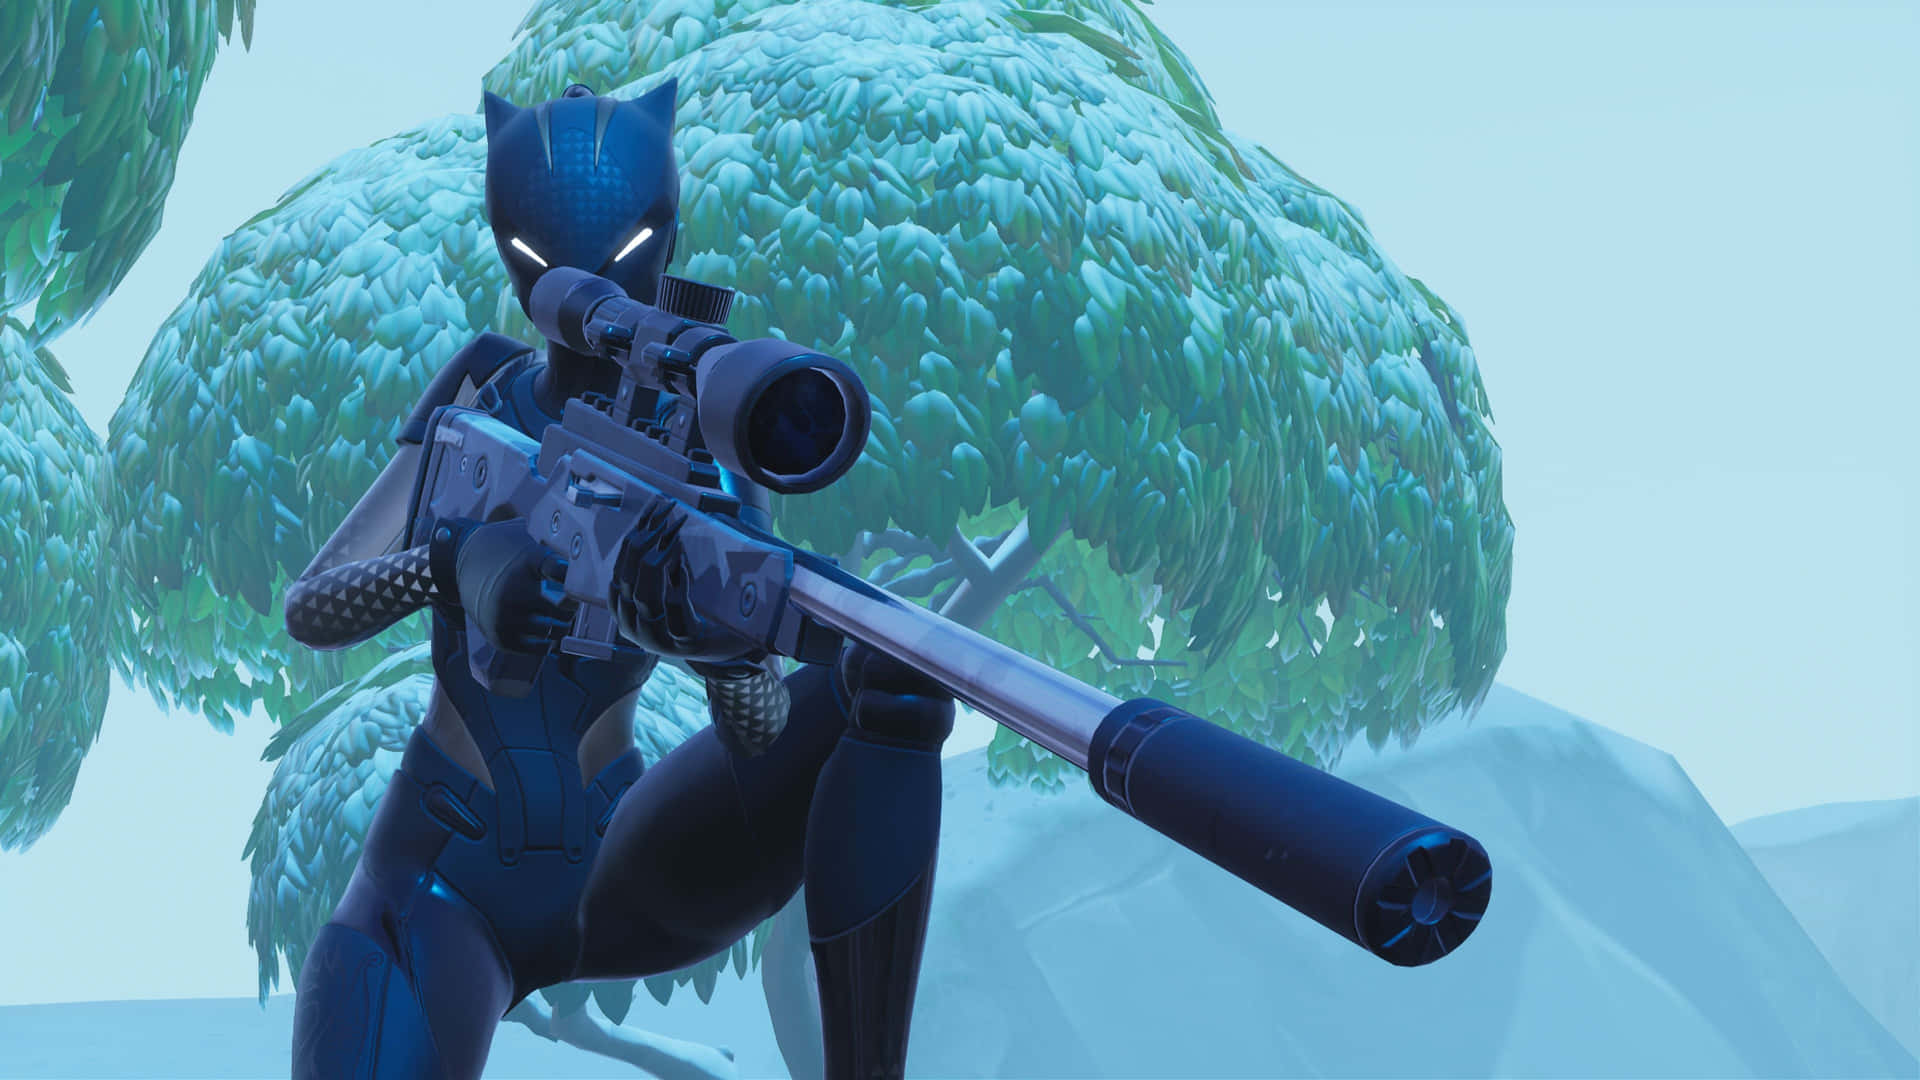 Play the popular battle royale game, Fortnite, with Lynx and her fierce feline power! Wallpaper